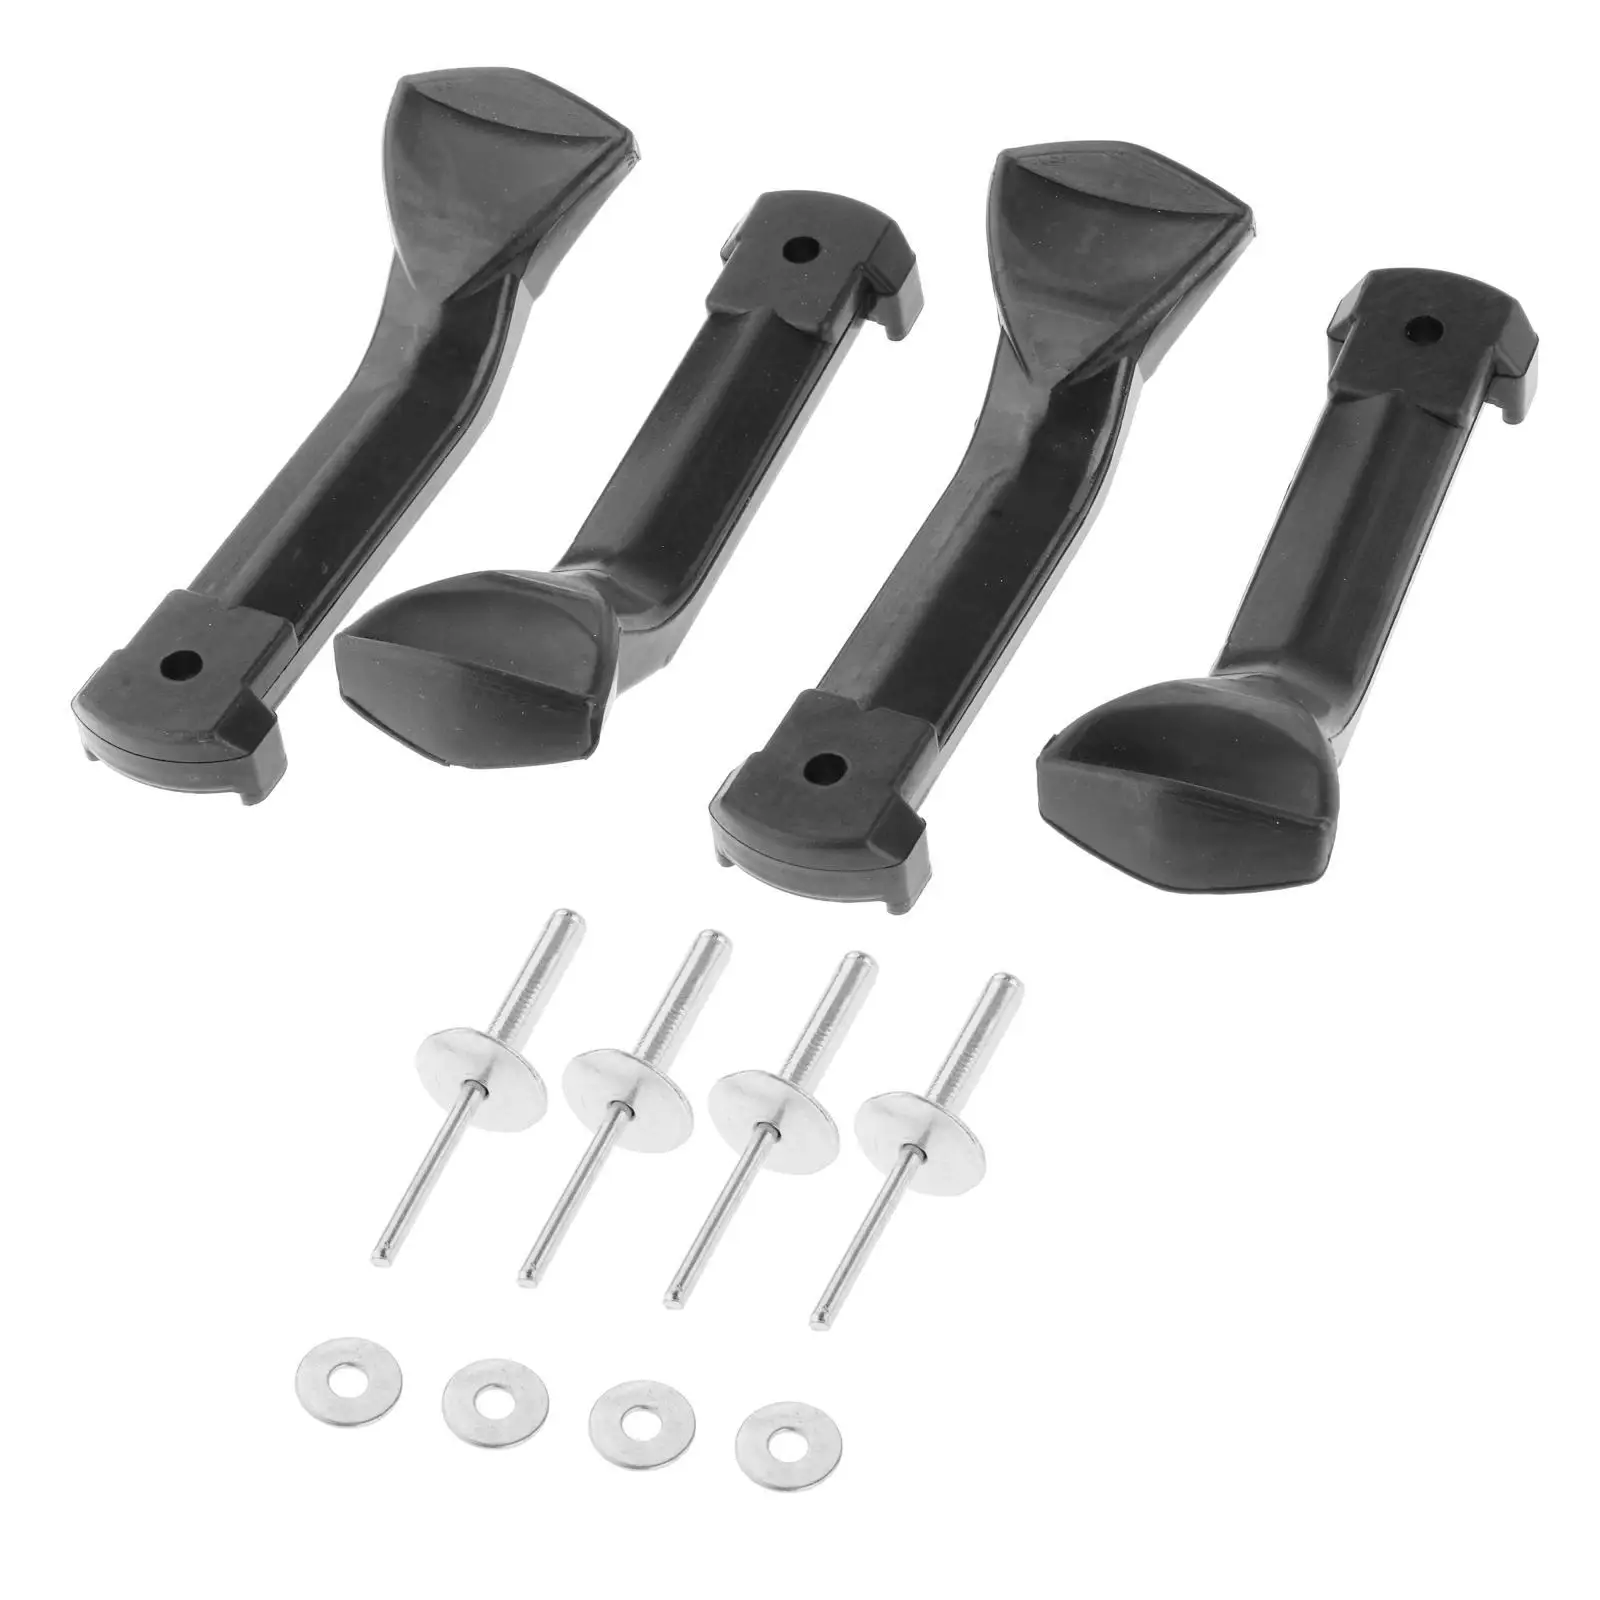 4 Pieces Hood Panel Latch Strap Kit Accessories Automotive Fit for Ski Doo 517302448